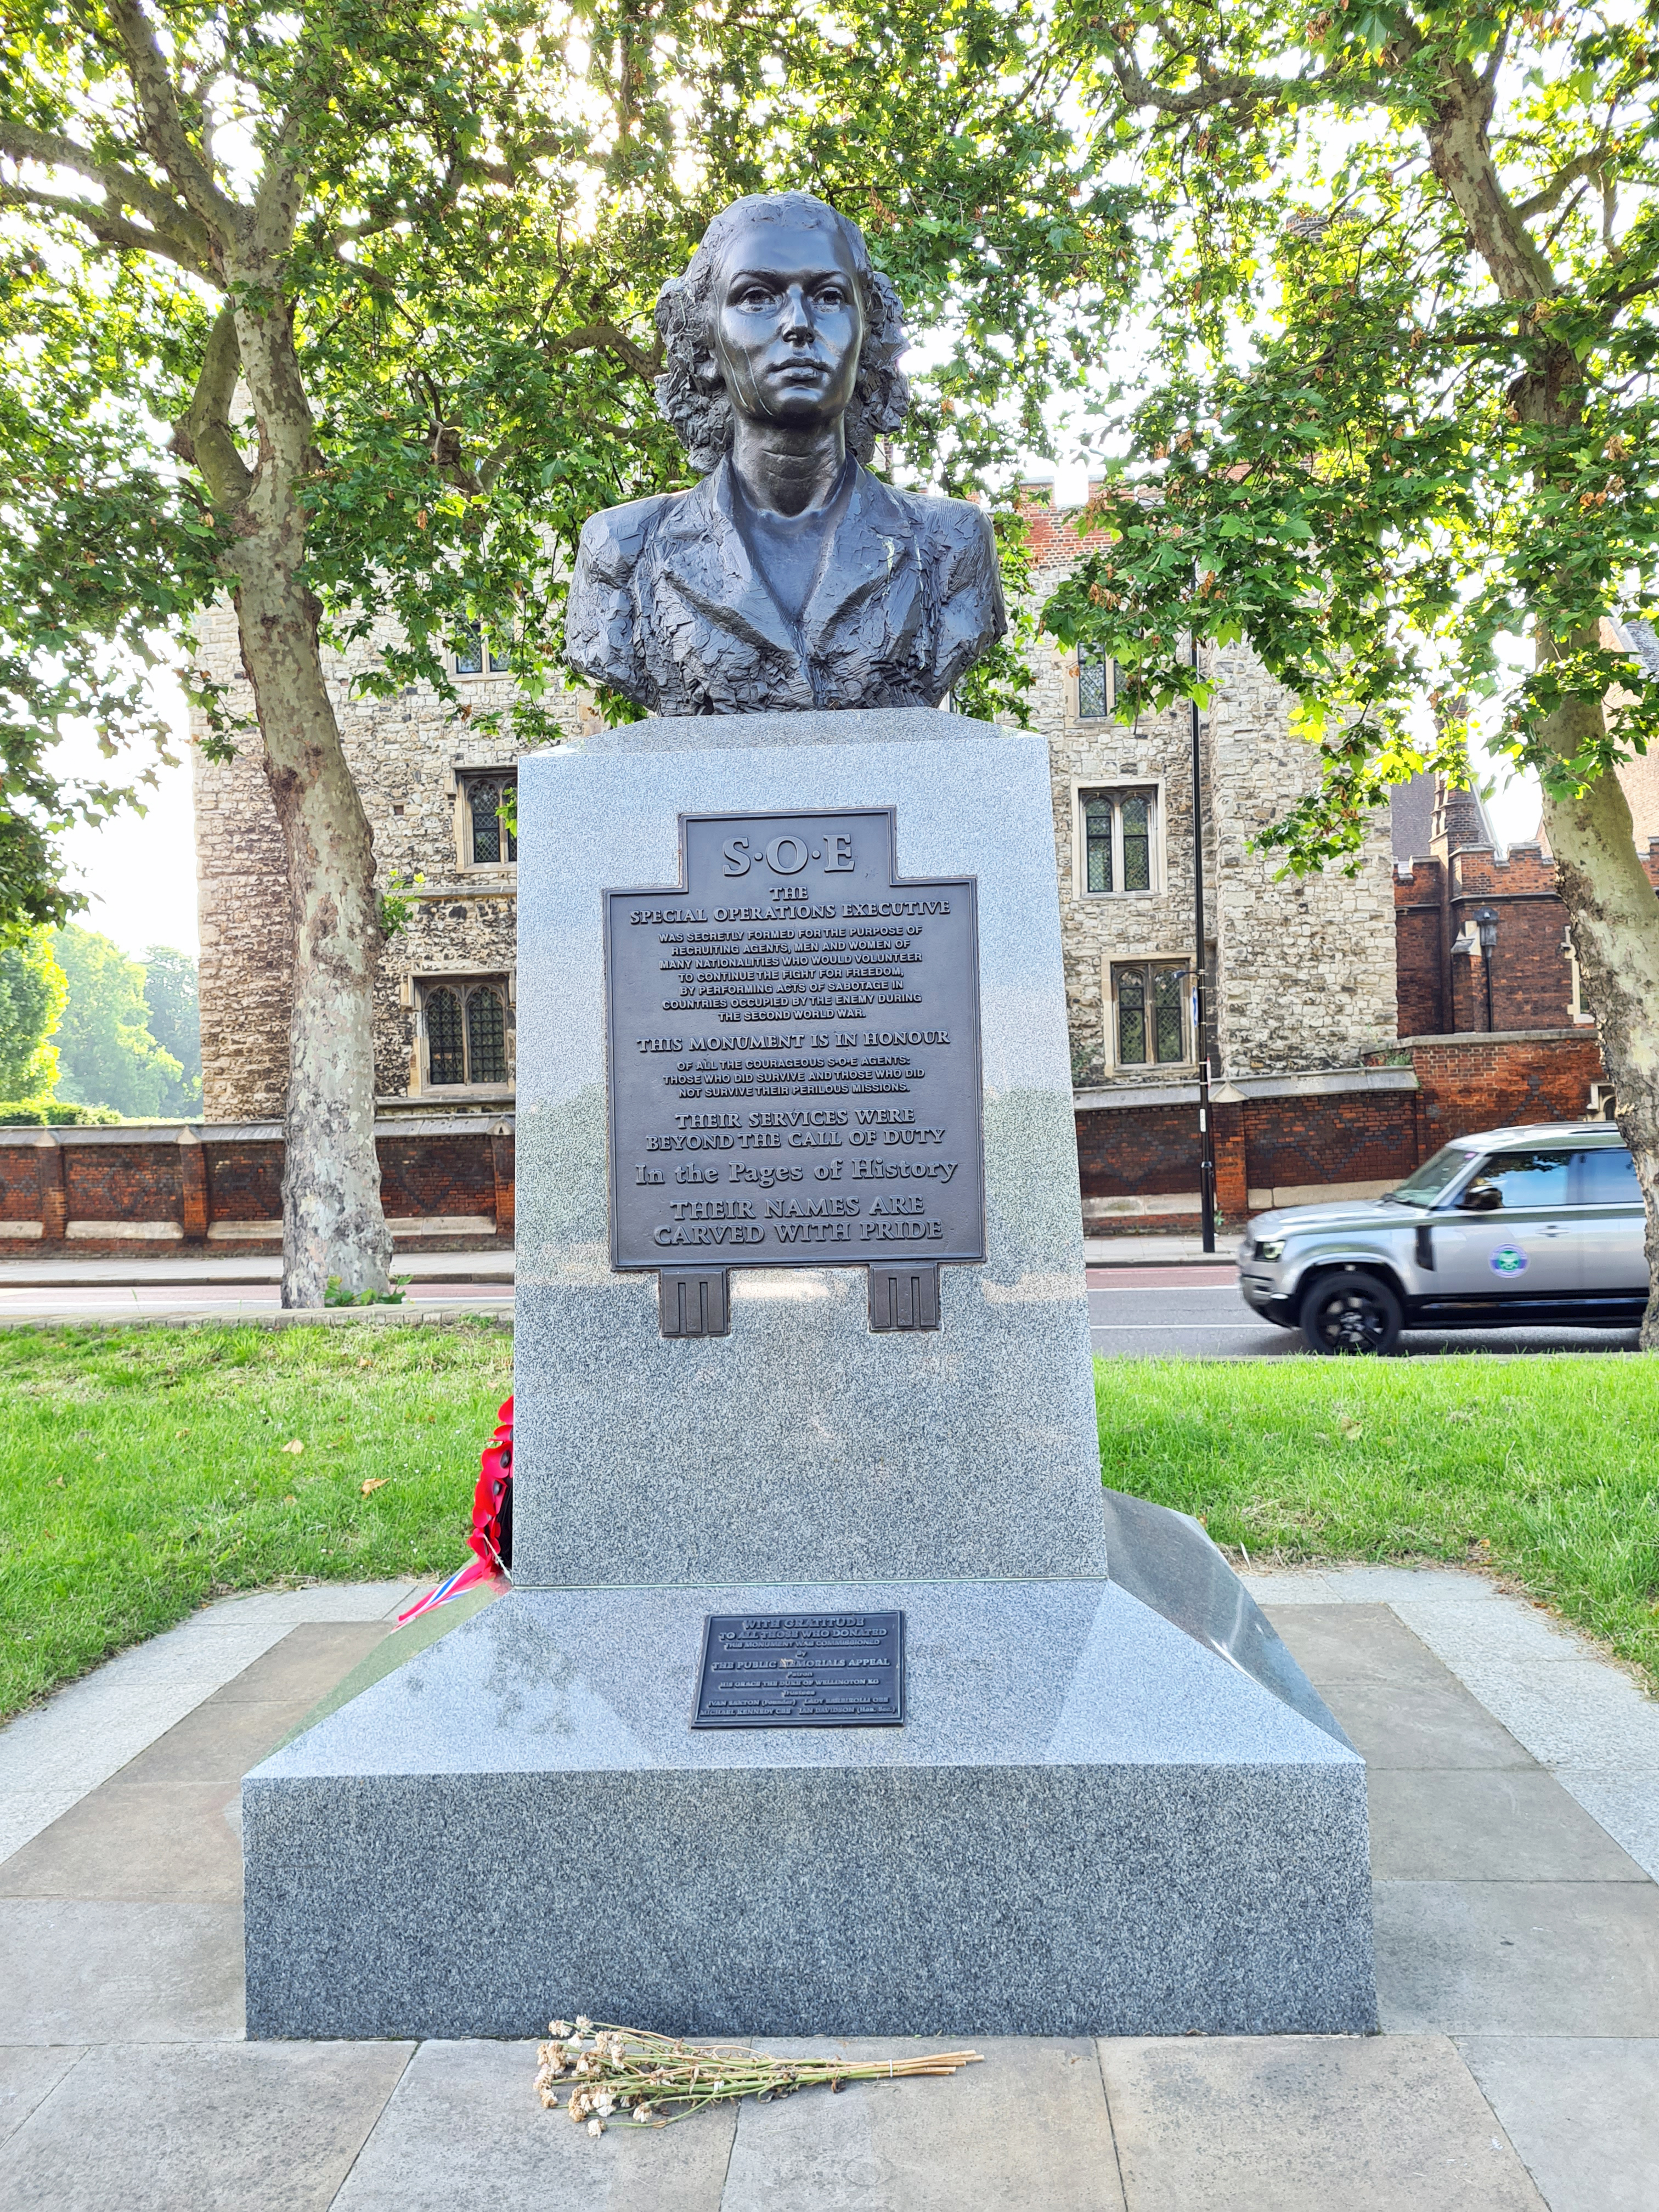 Memorial to the S.O.E.- Special Operations Executive. Bust of Violette Szabo by Karen Newman